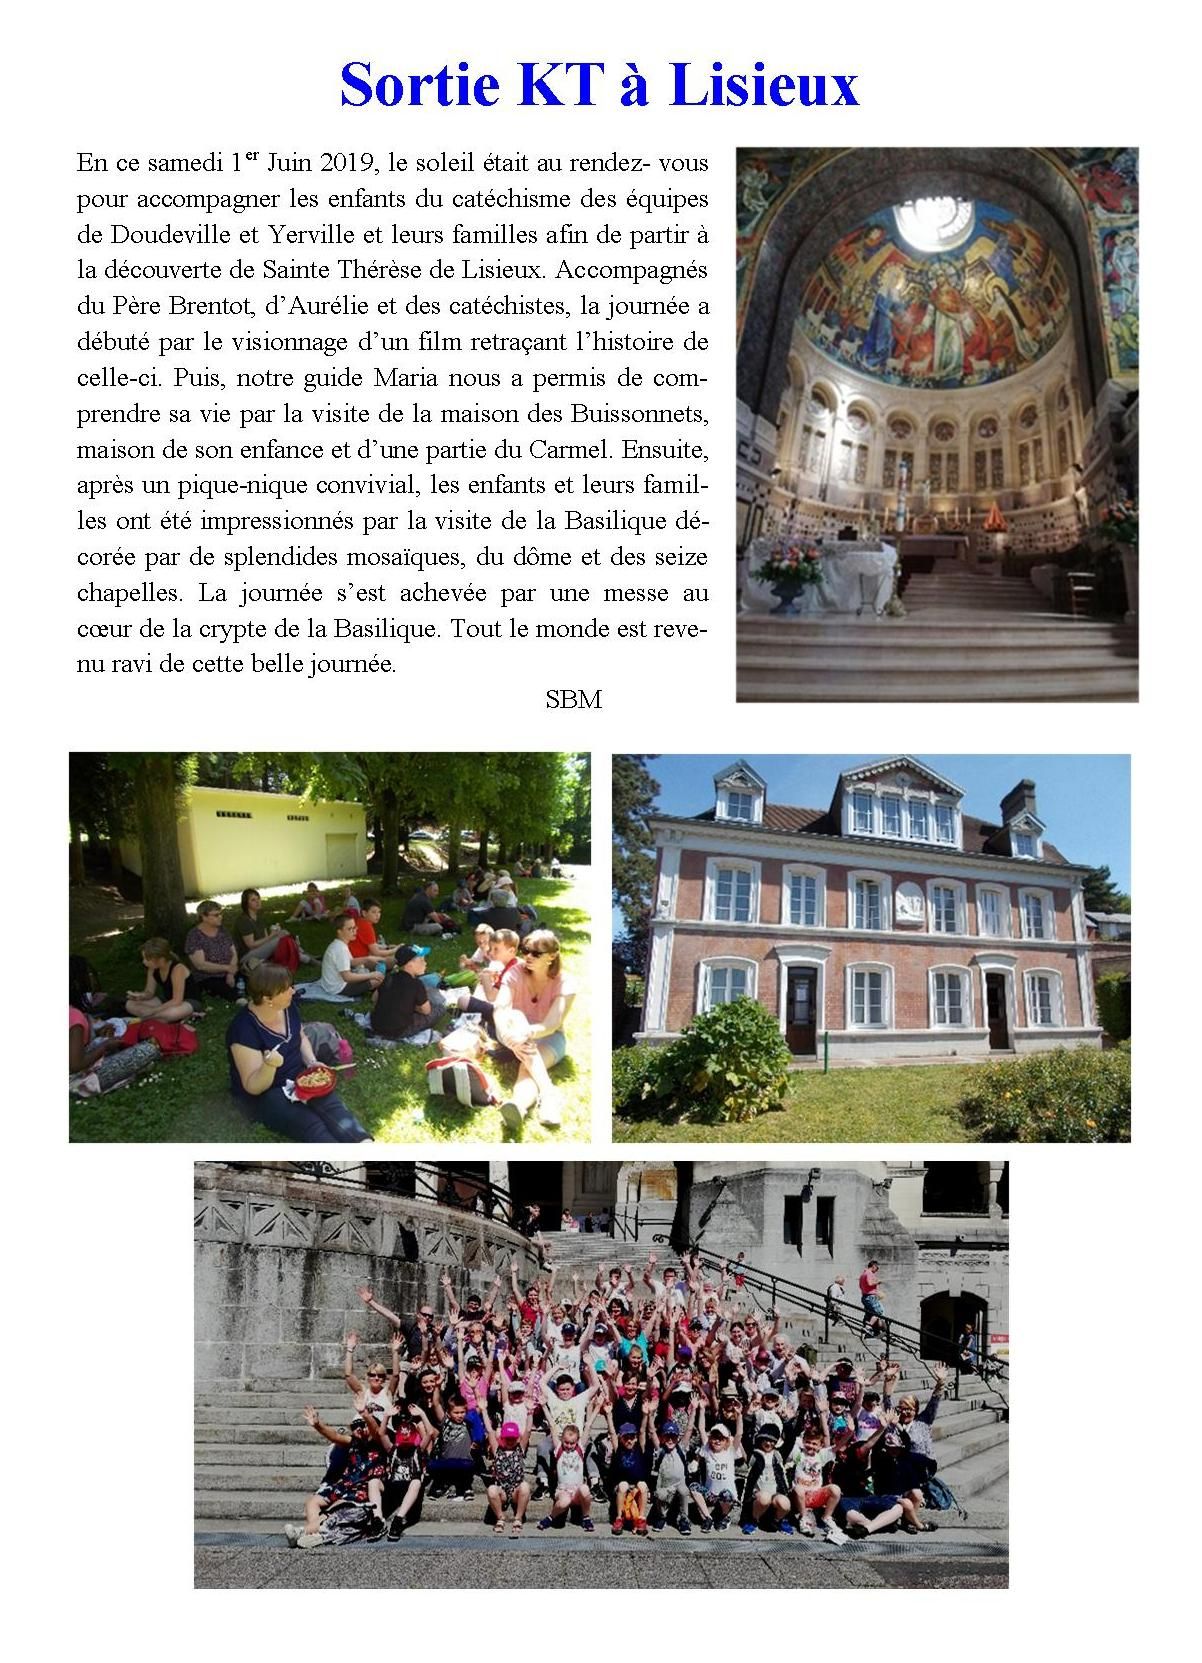 Sortie-KT-a-Lisieux-page-4